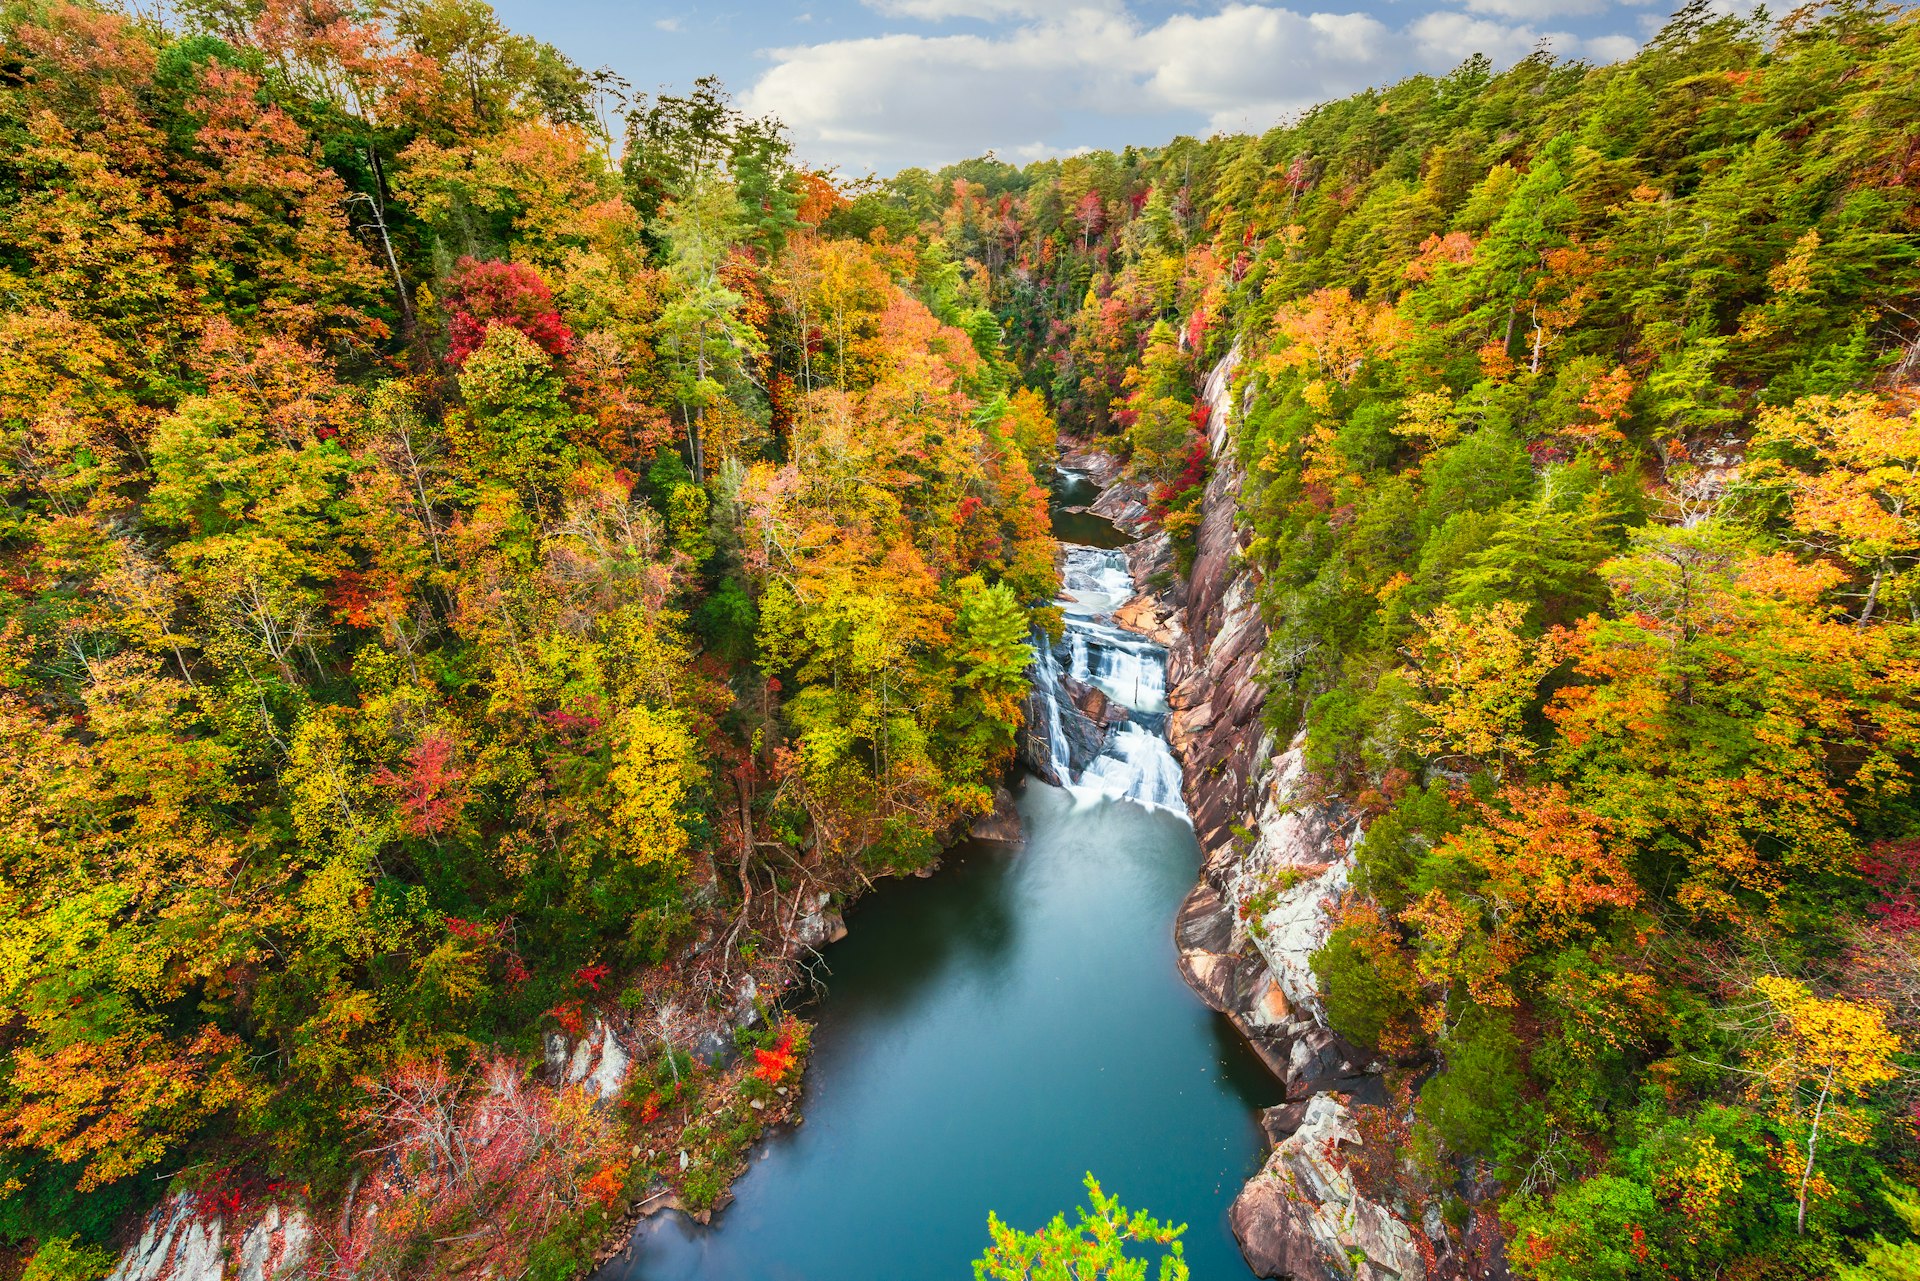 A high-angle view of a gorge surrounded by fall colors